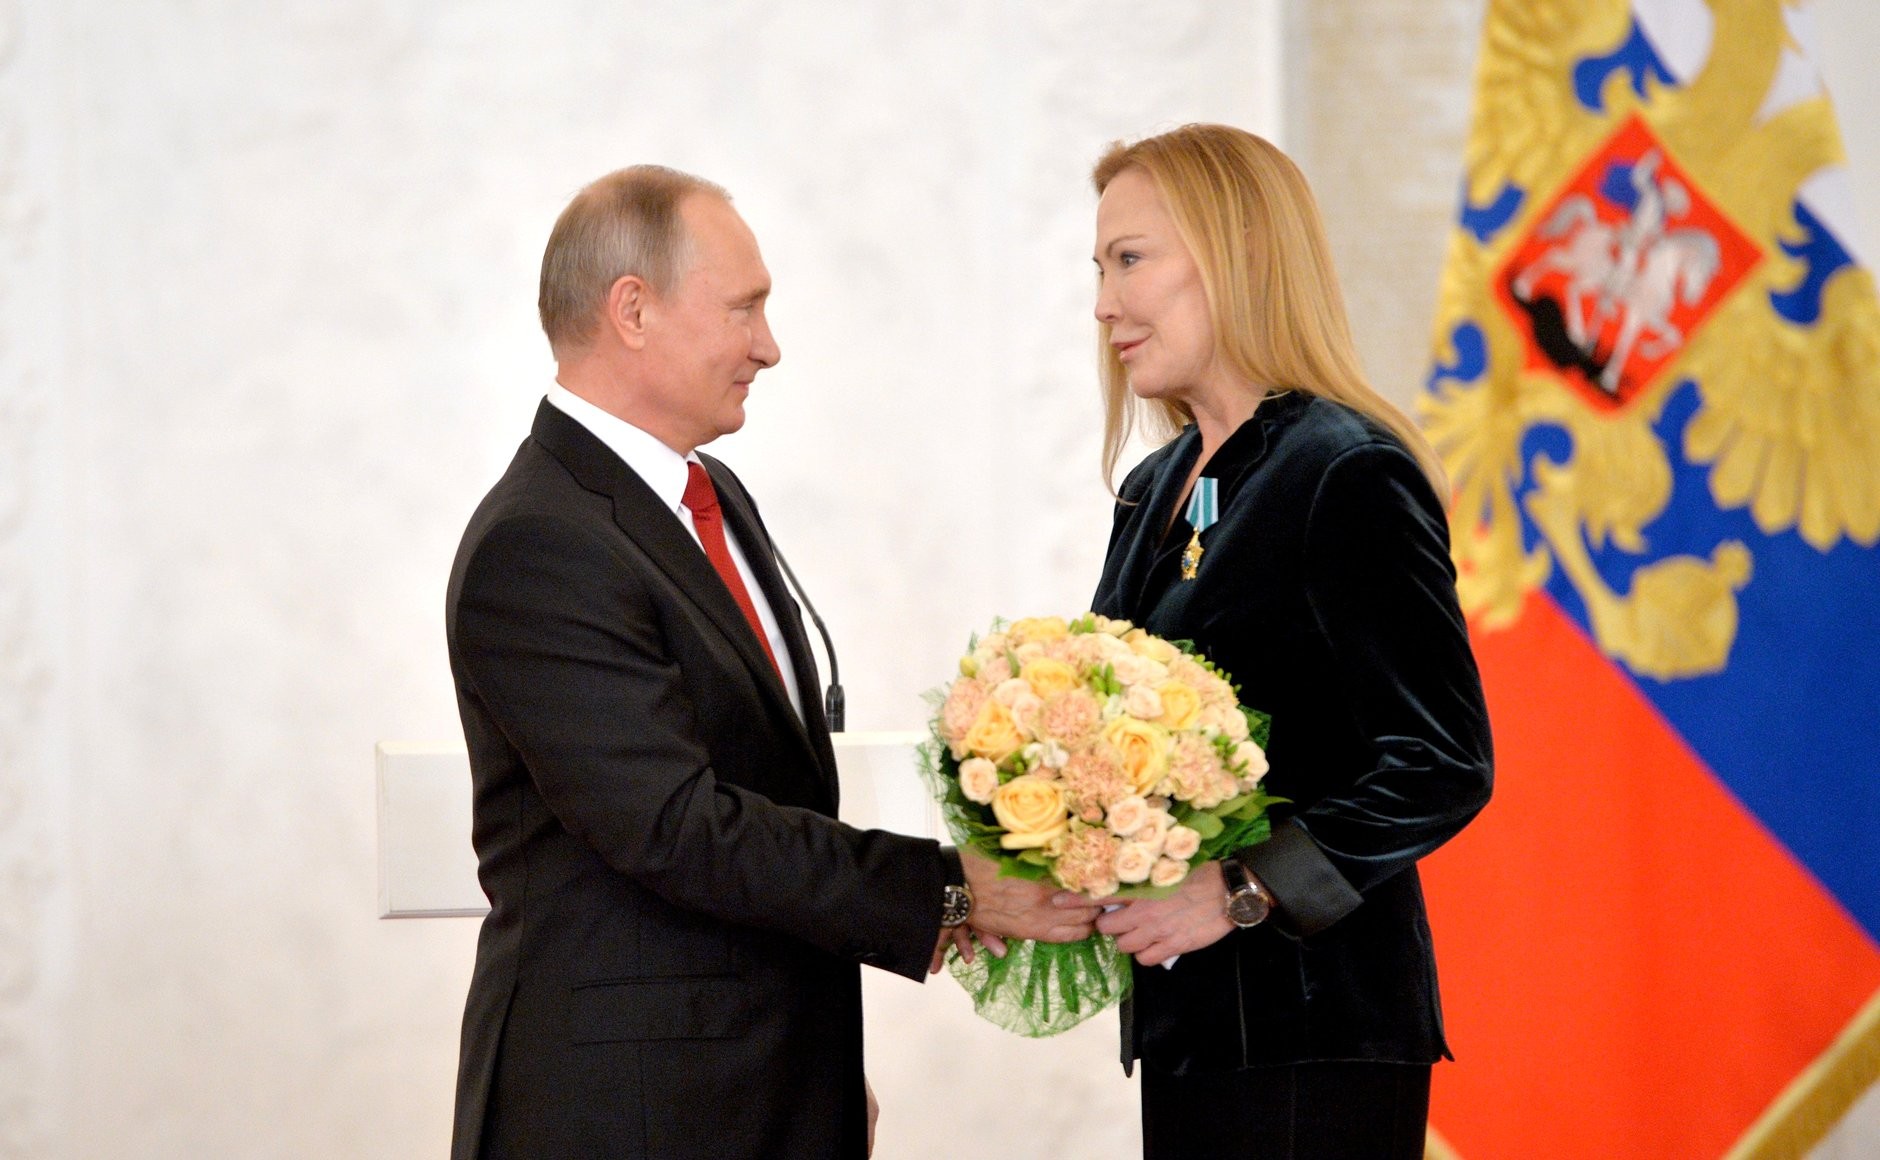 Considering the Carmel Institute: Is All Russian Public Diplomacy Malign?